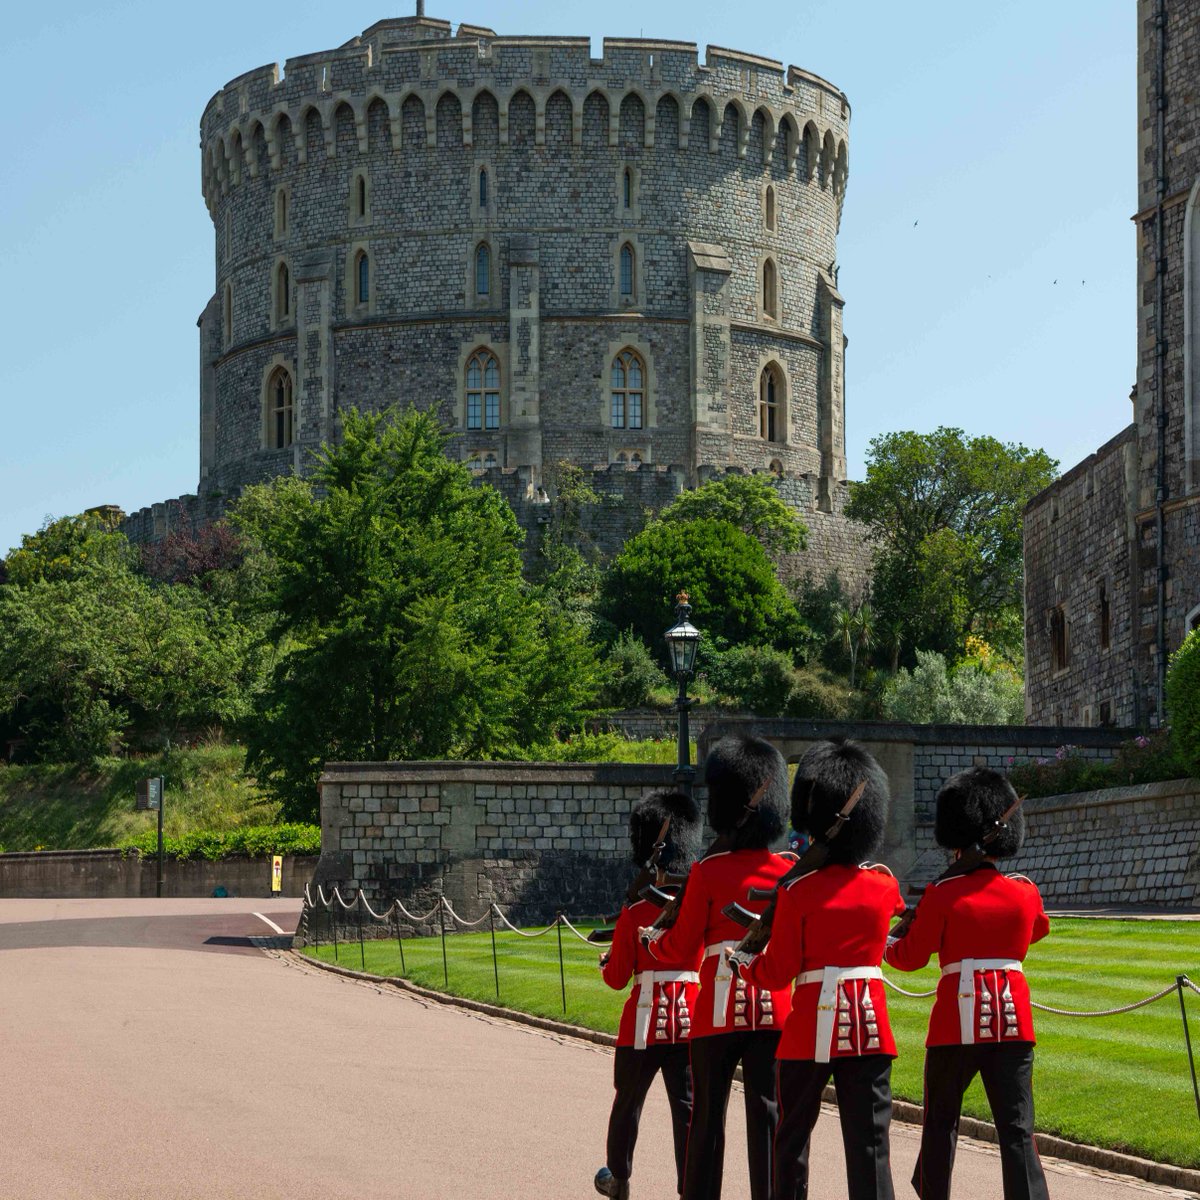 📢 Last chance to apply for the Visitor Services Manager role at #WindsorCastle, managing all aspects of the visitor journey. From customer care and guided tours, to access and security, you'll make sure our visitors always receive outstanding service. bit.ly/3UgKsdD